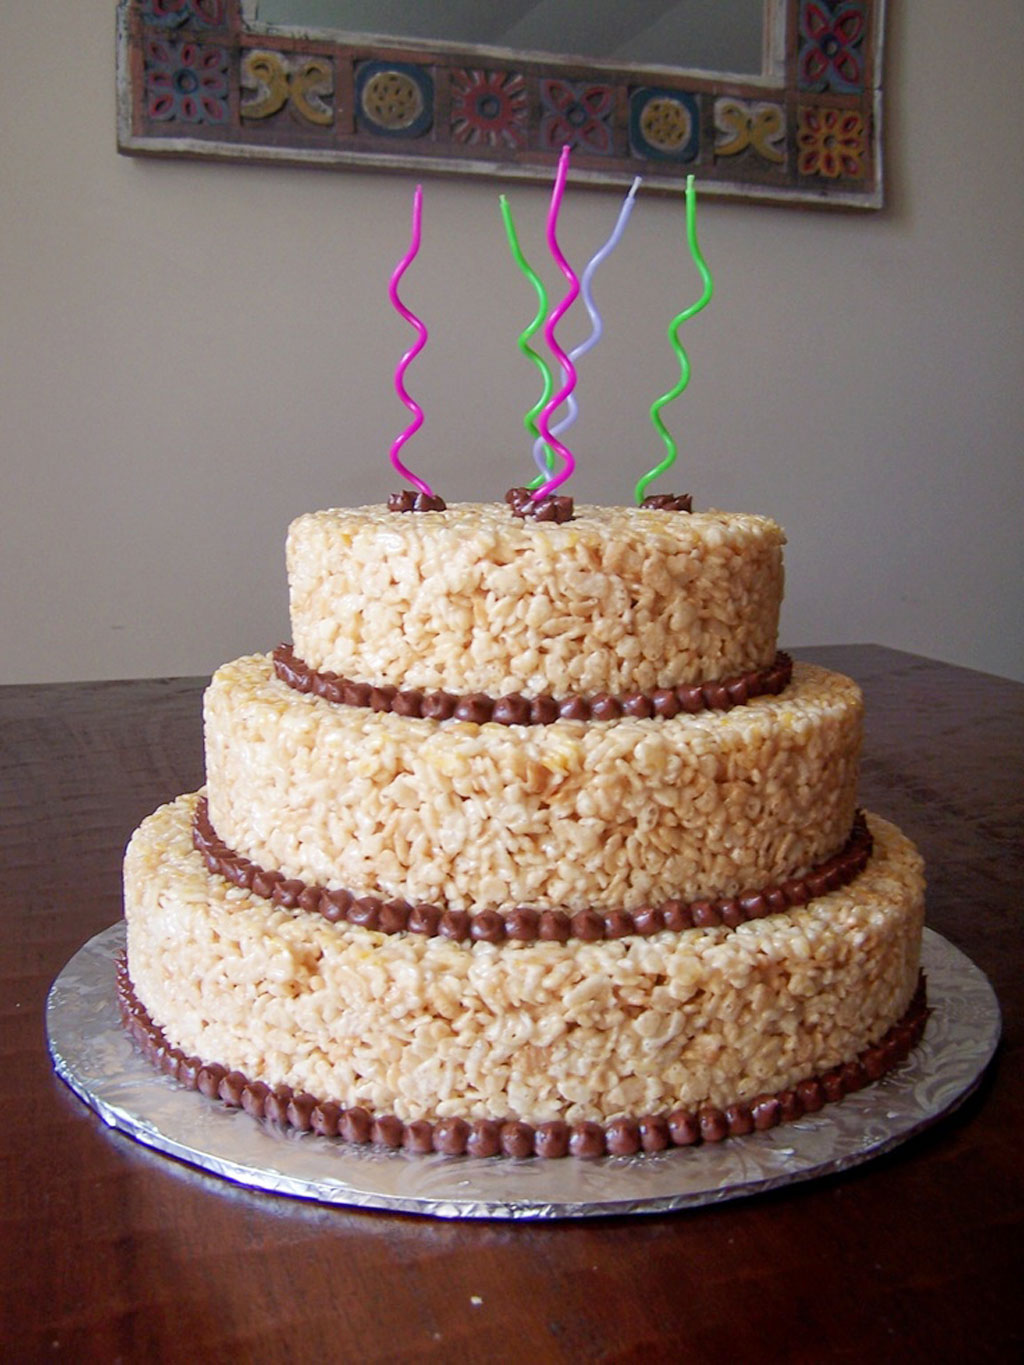 Awesome Birthday Cake Rice Krispie Treats Don't miss out!